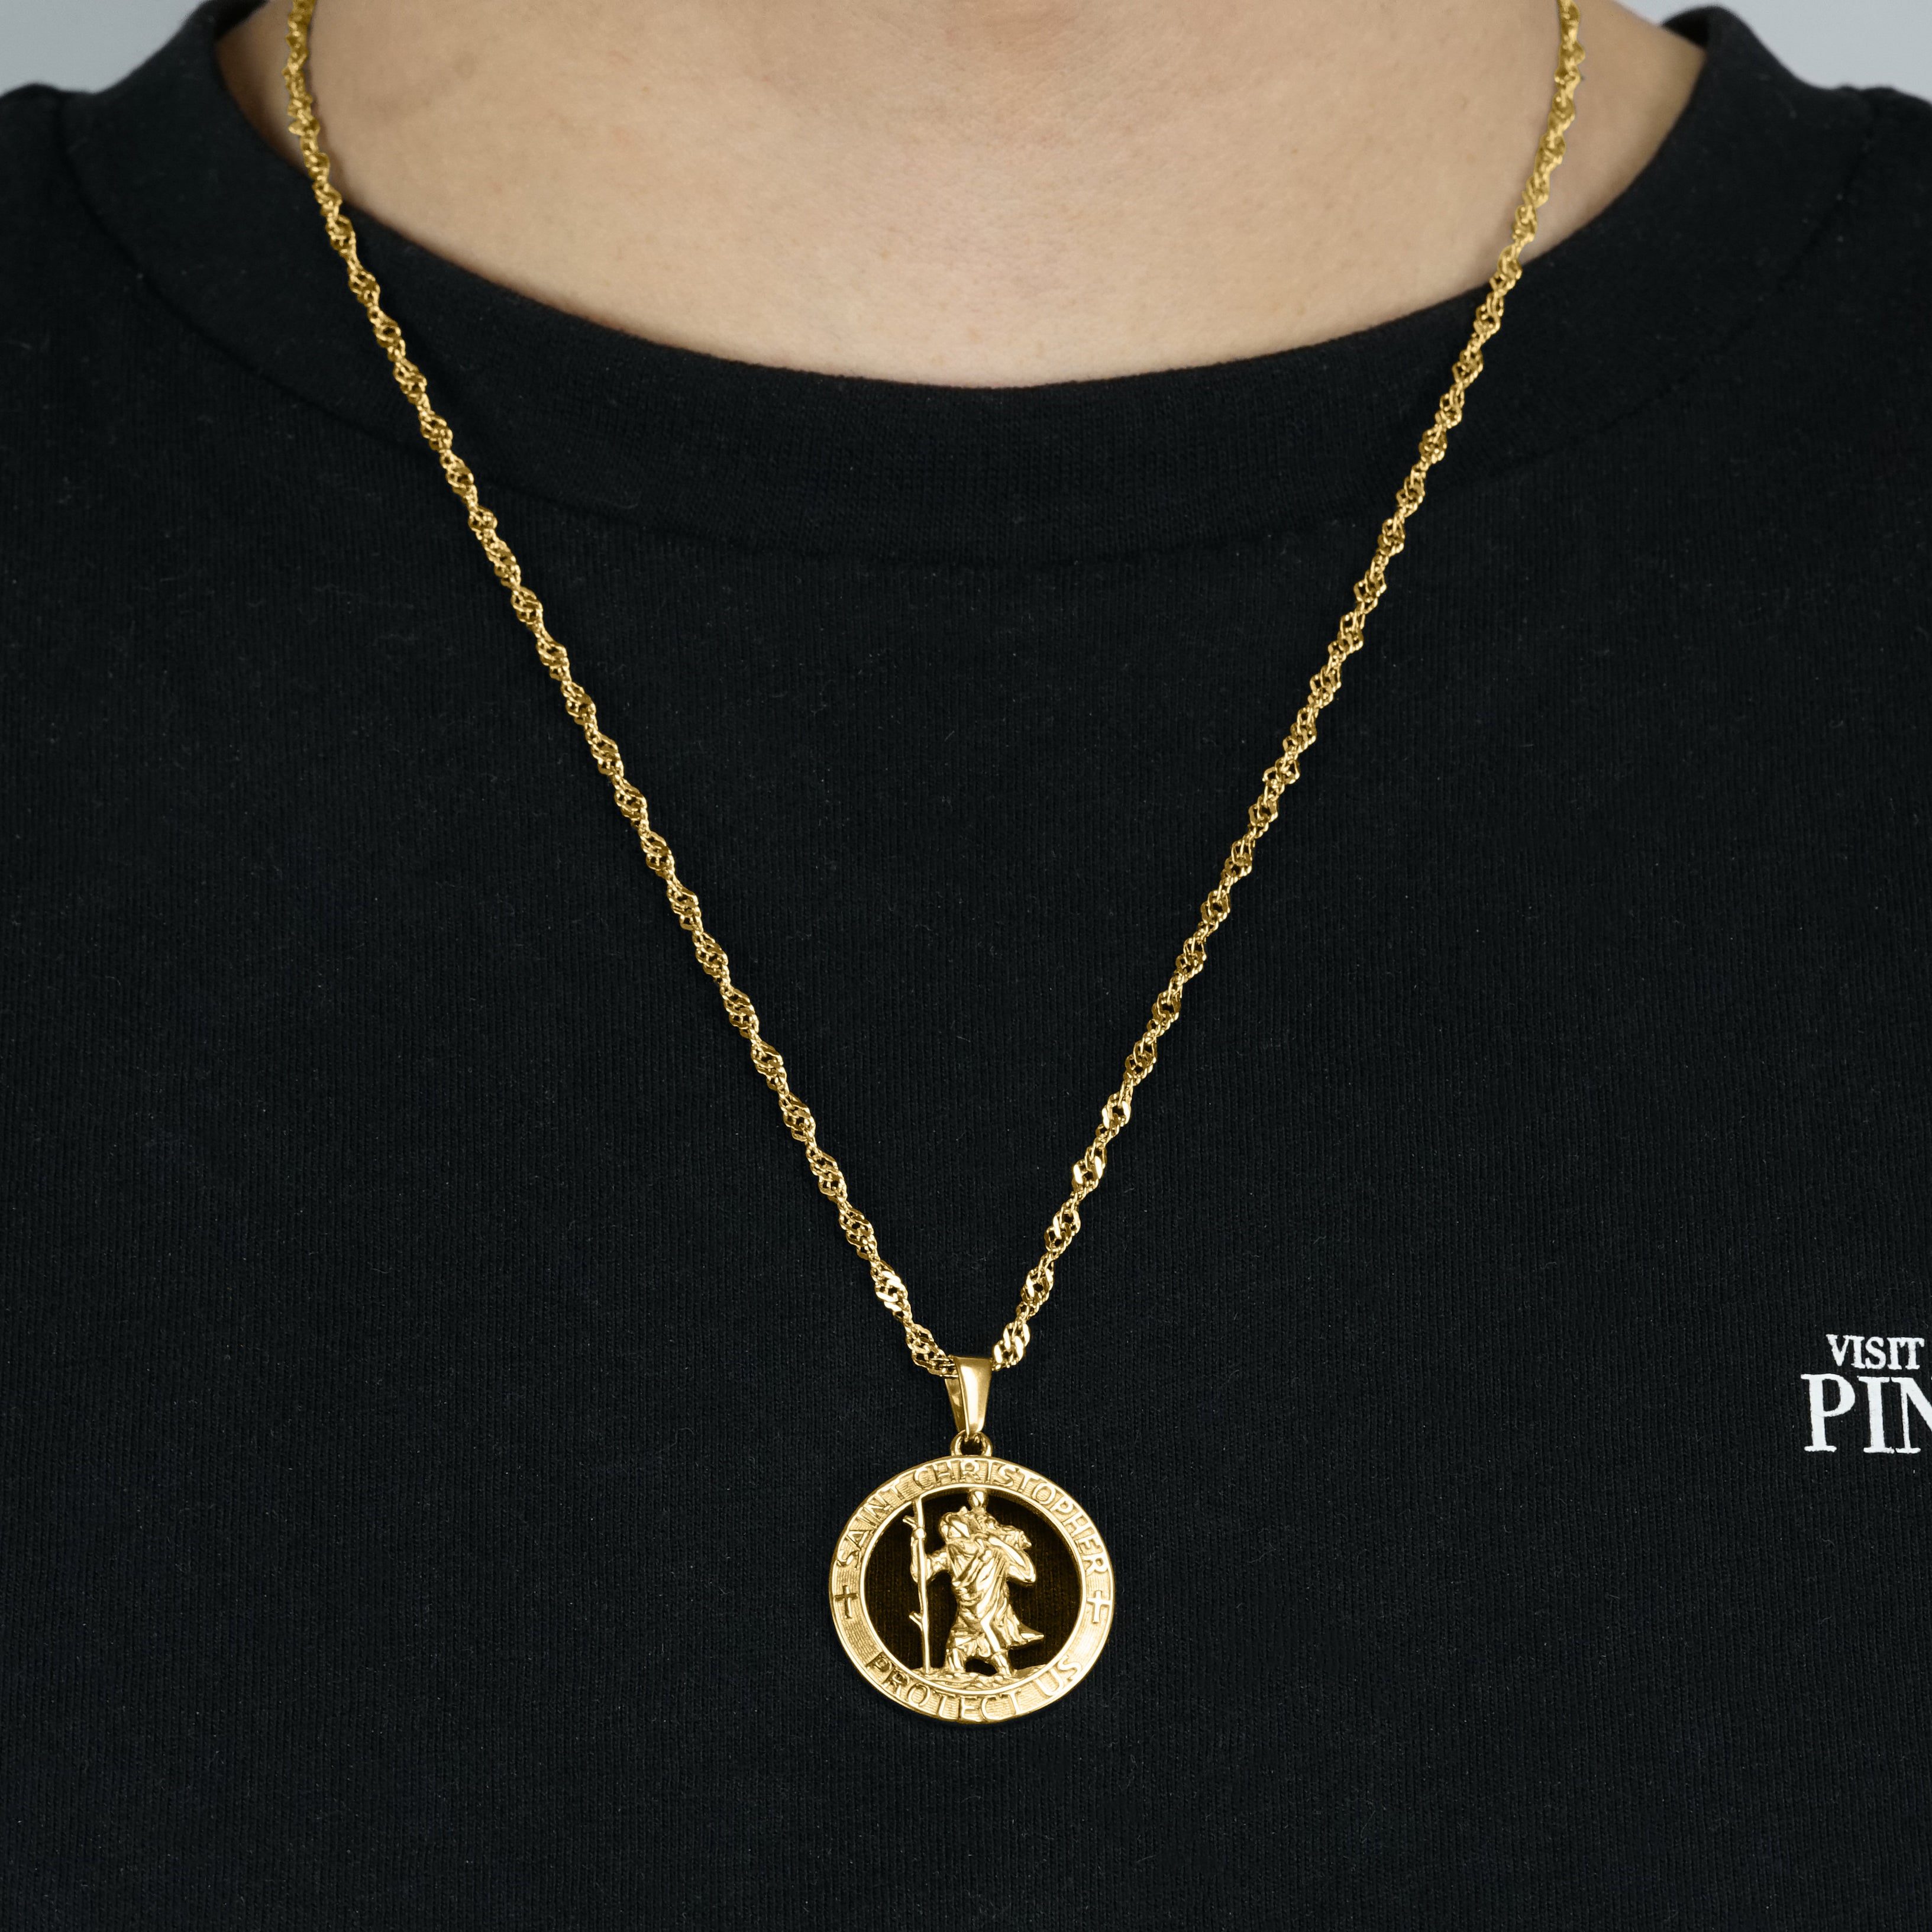 ST. CHRISTOPHER NECKLACE - GOLD